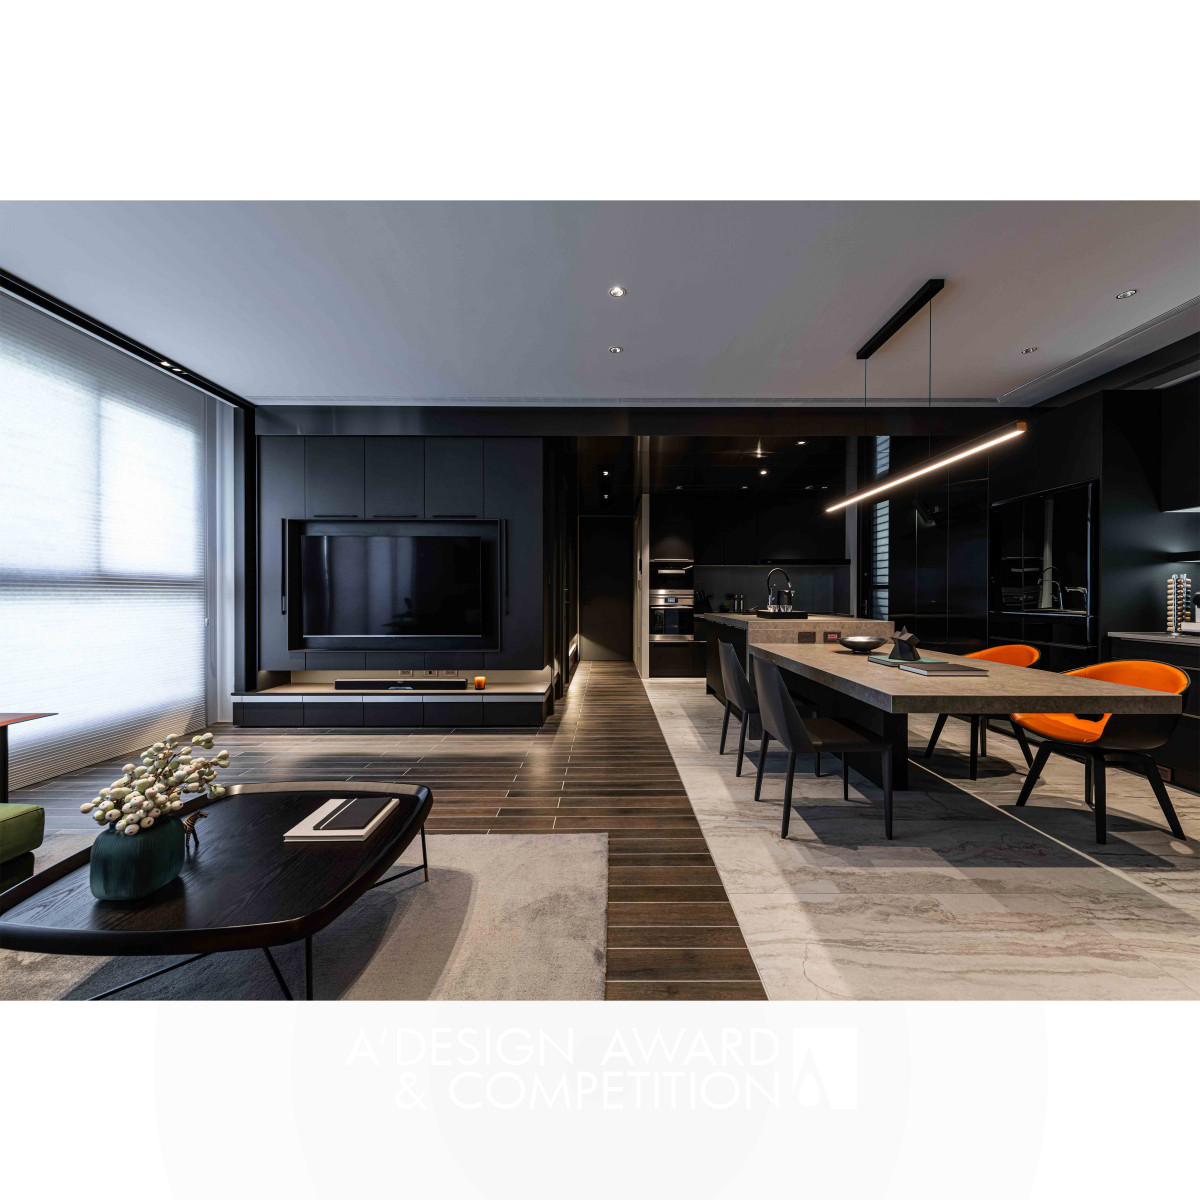 Black Definition Residential by George PC Kao Iron Interior Space and Exhibition Design Award Winner 2020 